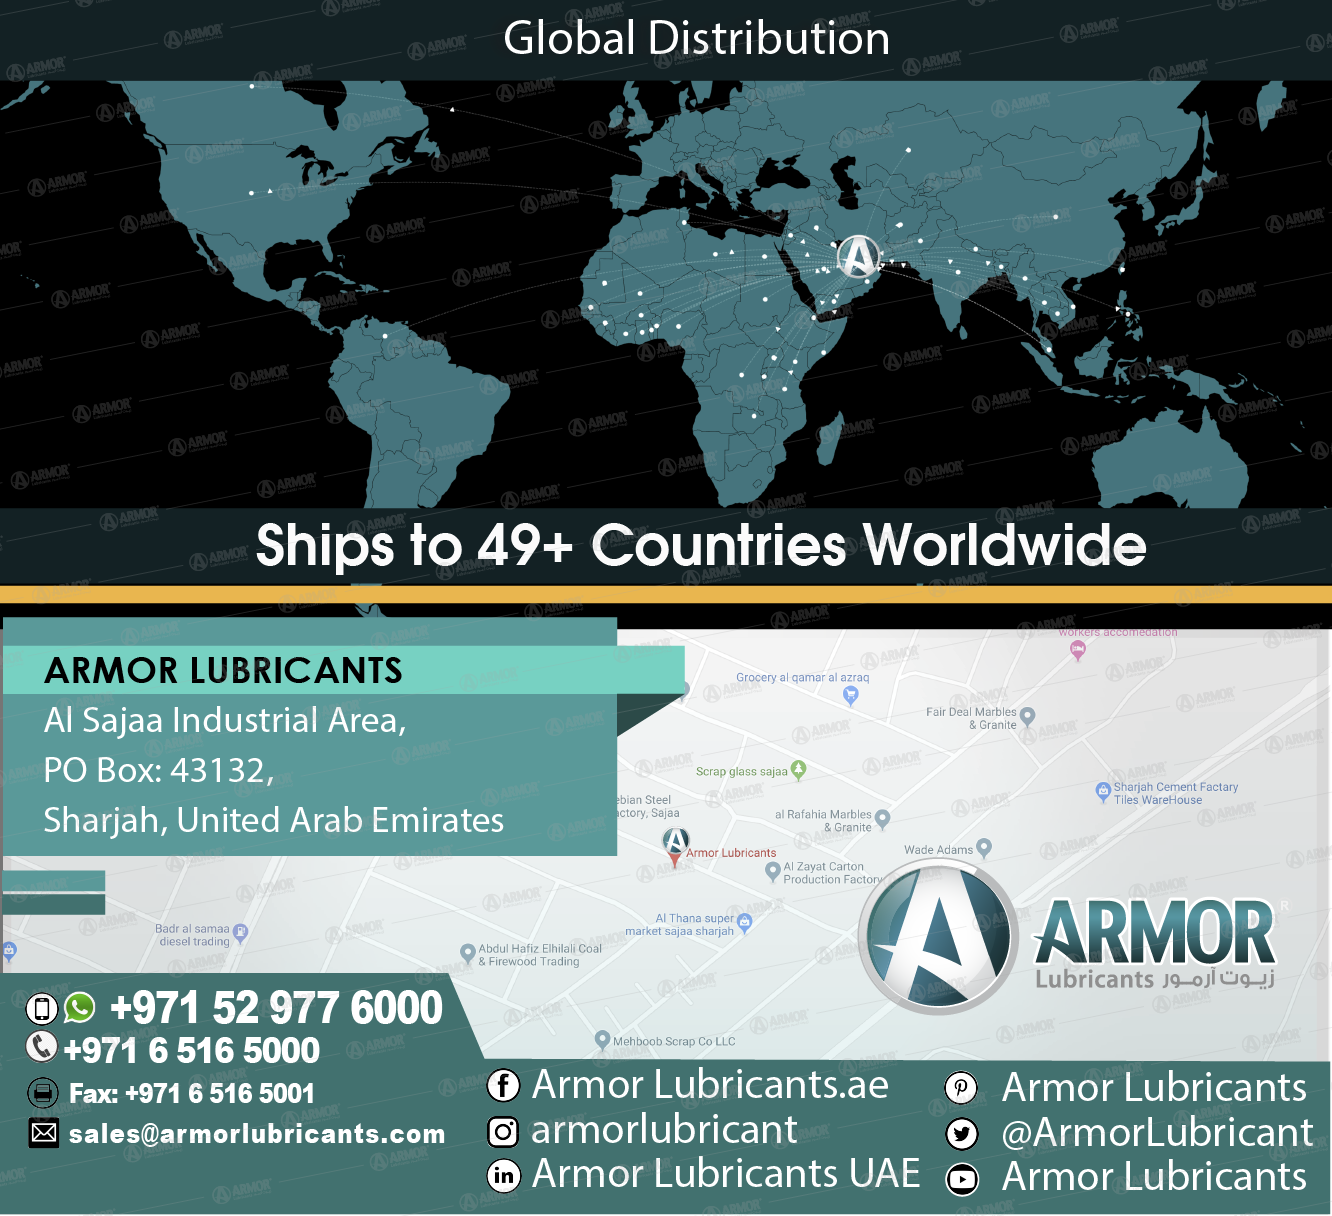 Contact Armor Lubricants - Reputation and Loyal Customers we have won